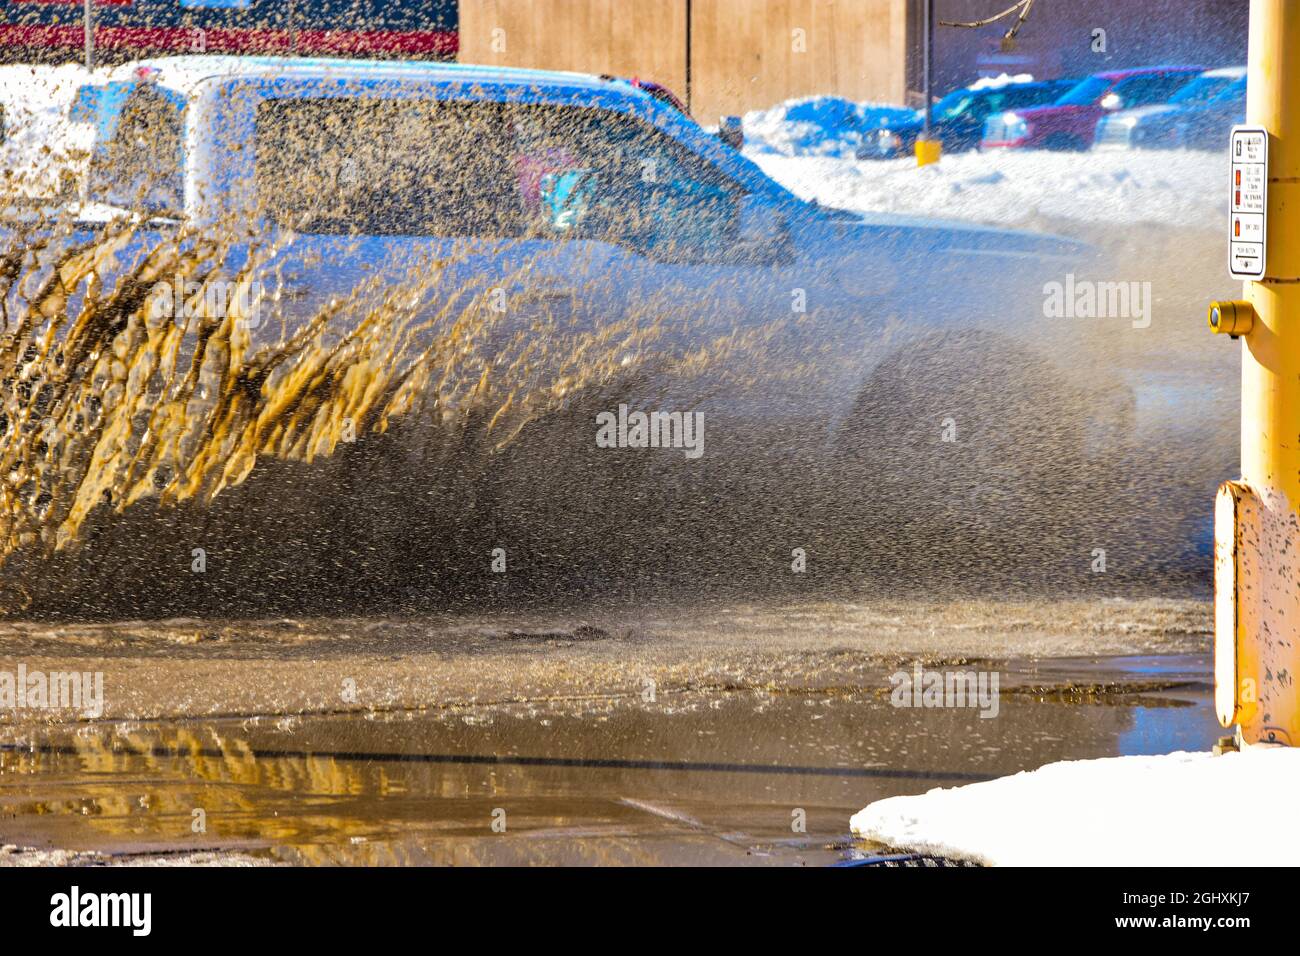 Vehicles driving through standing water from snowmelt creating muddy spray. Stock Photo